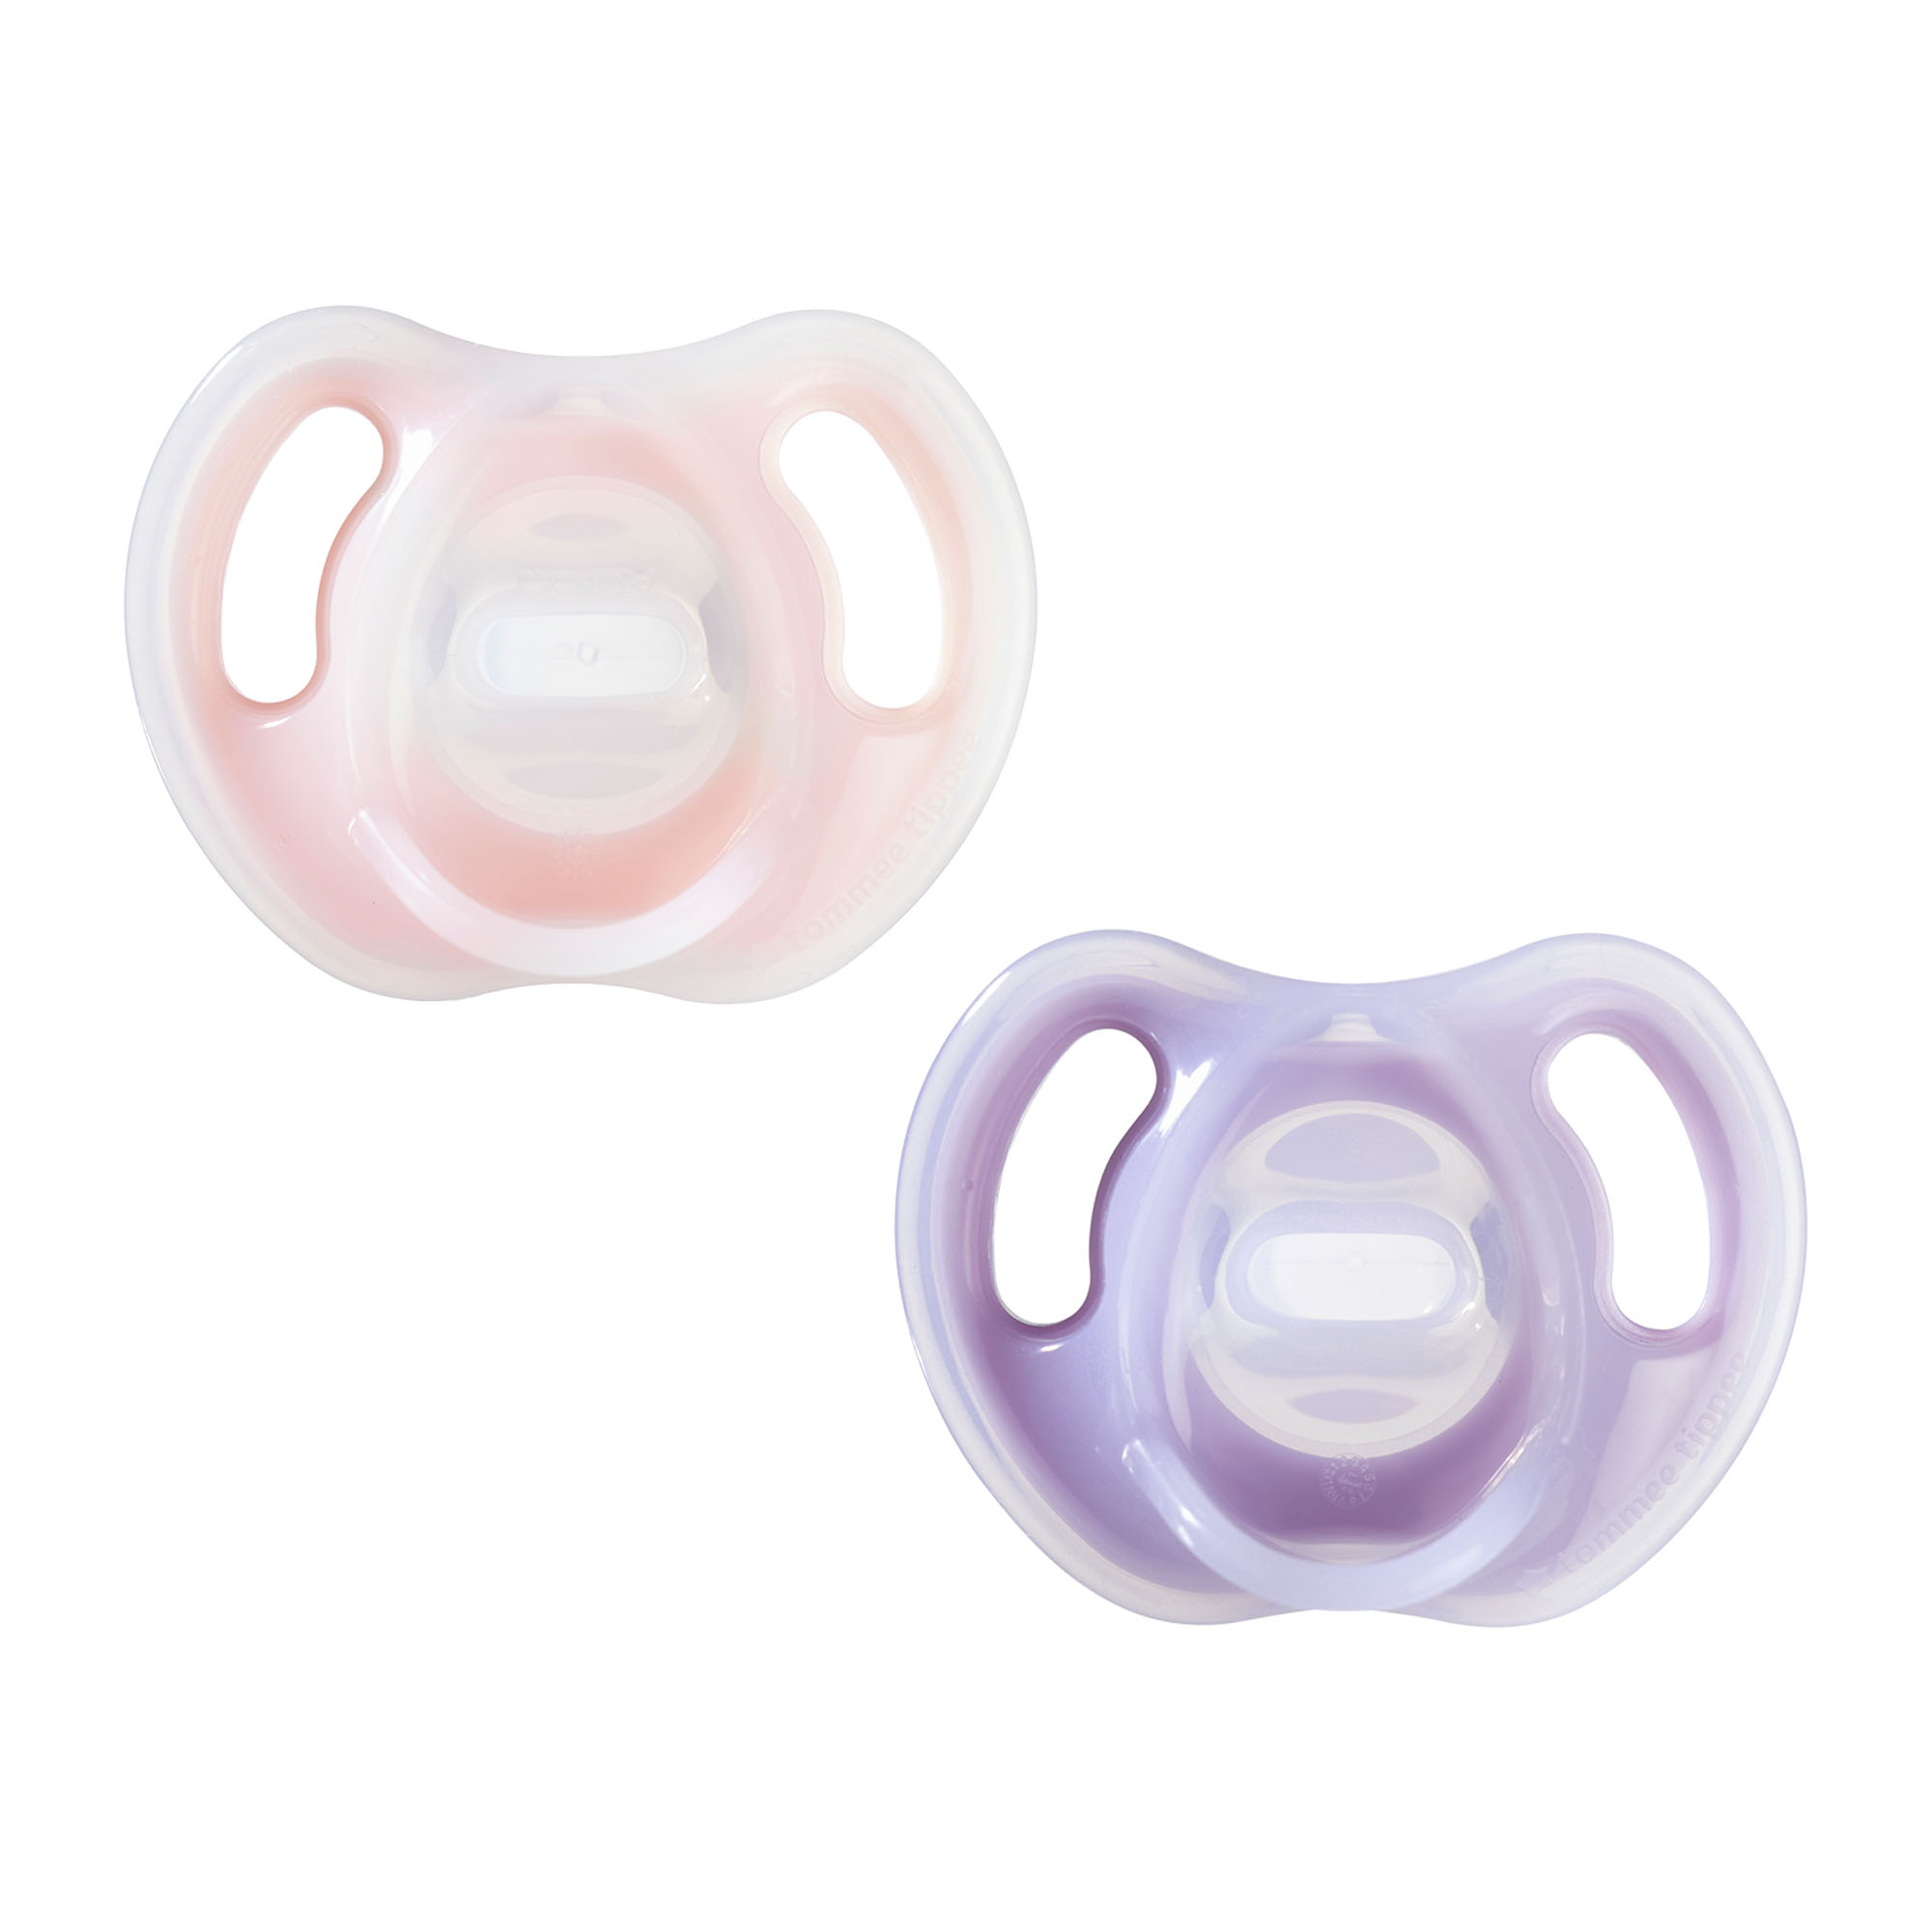 Tommee Tippee Ultra-Light Silicone Pacifier, 0-6 months, Symmetrical One-Piece Design, BPA-Free Silicone Binkies, Includes Sterilizer Box, 2 Pack - image 1 of 9